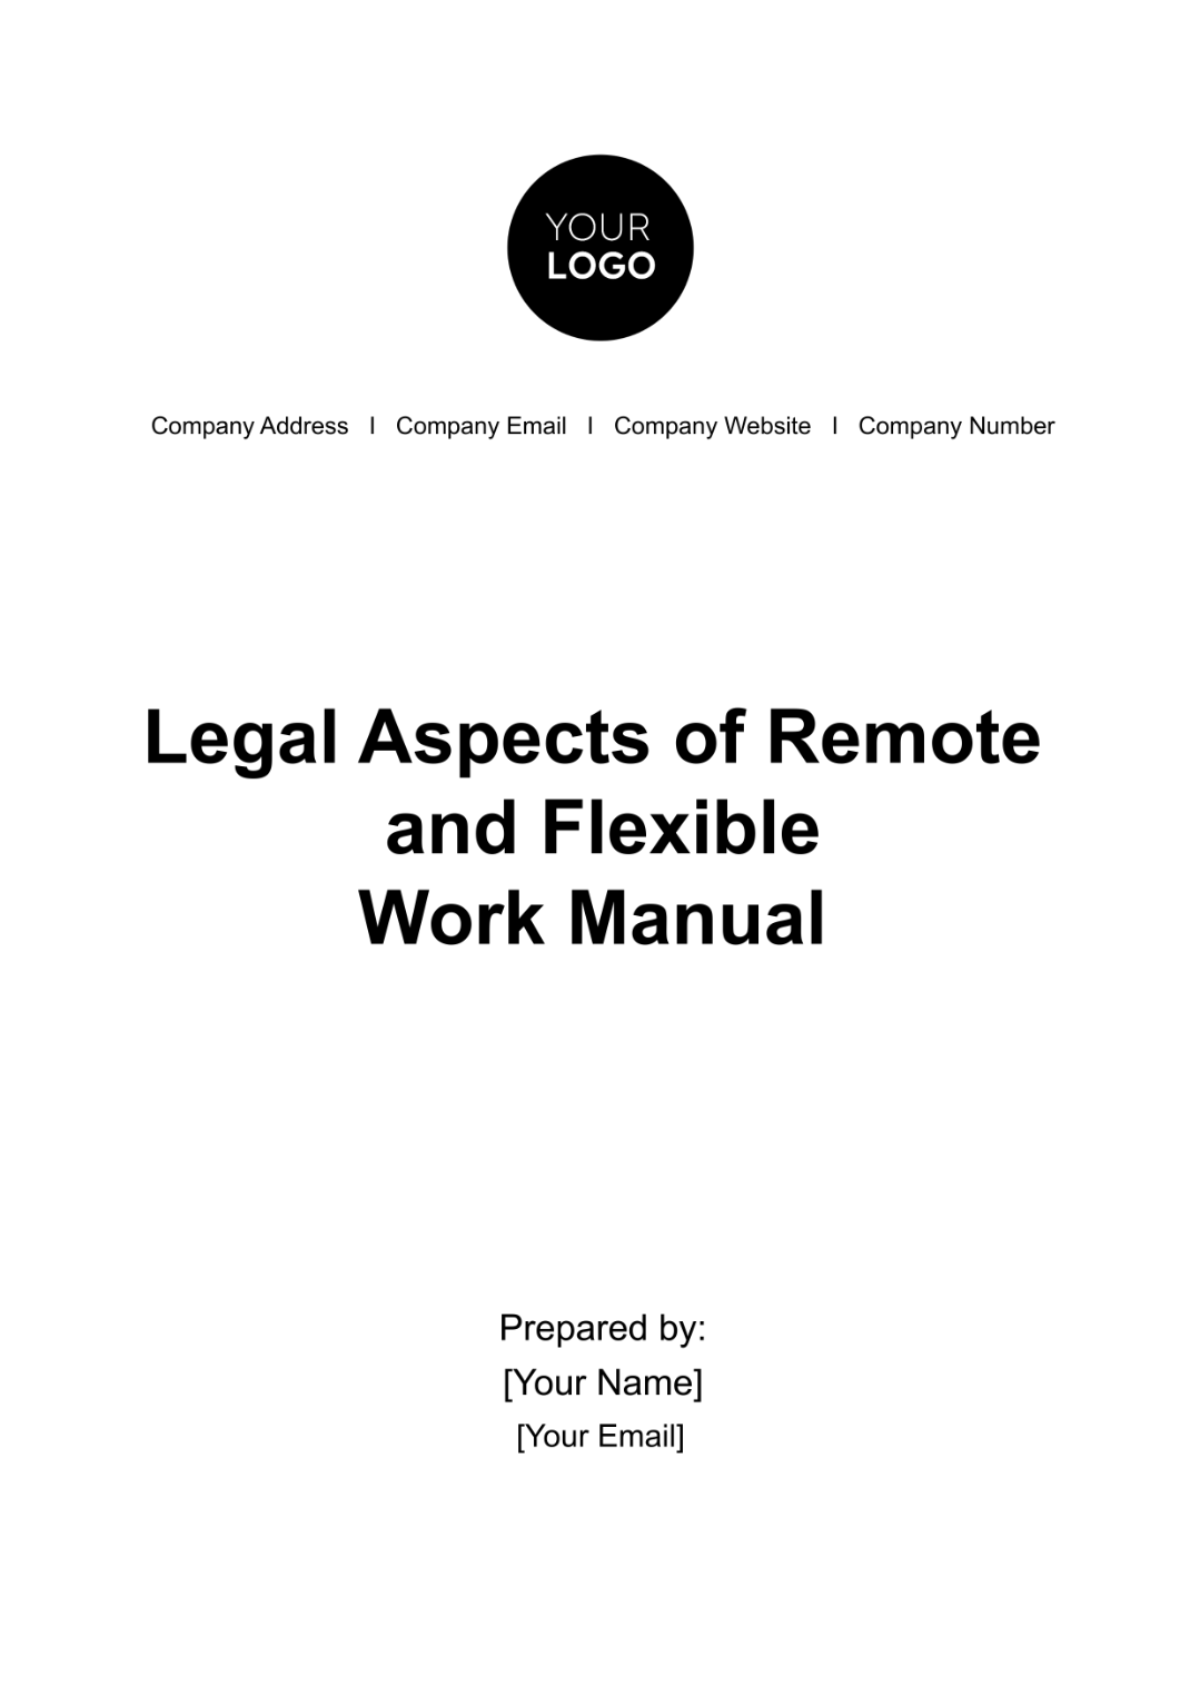 Free Legal Aspects of Remote and Flexible Work Manual HR Template